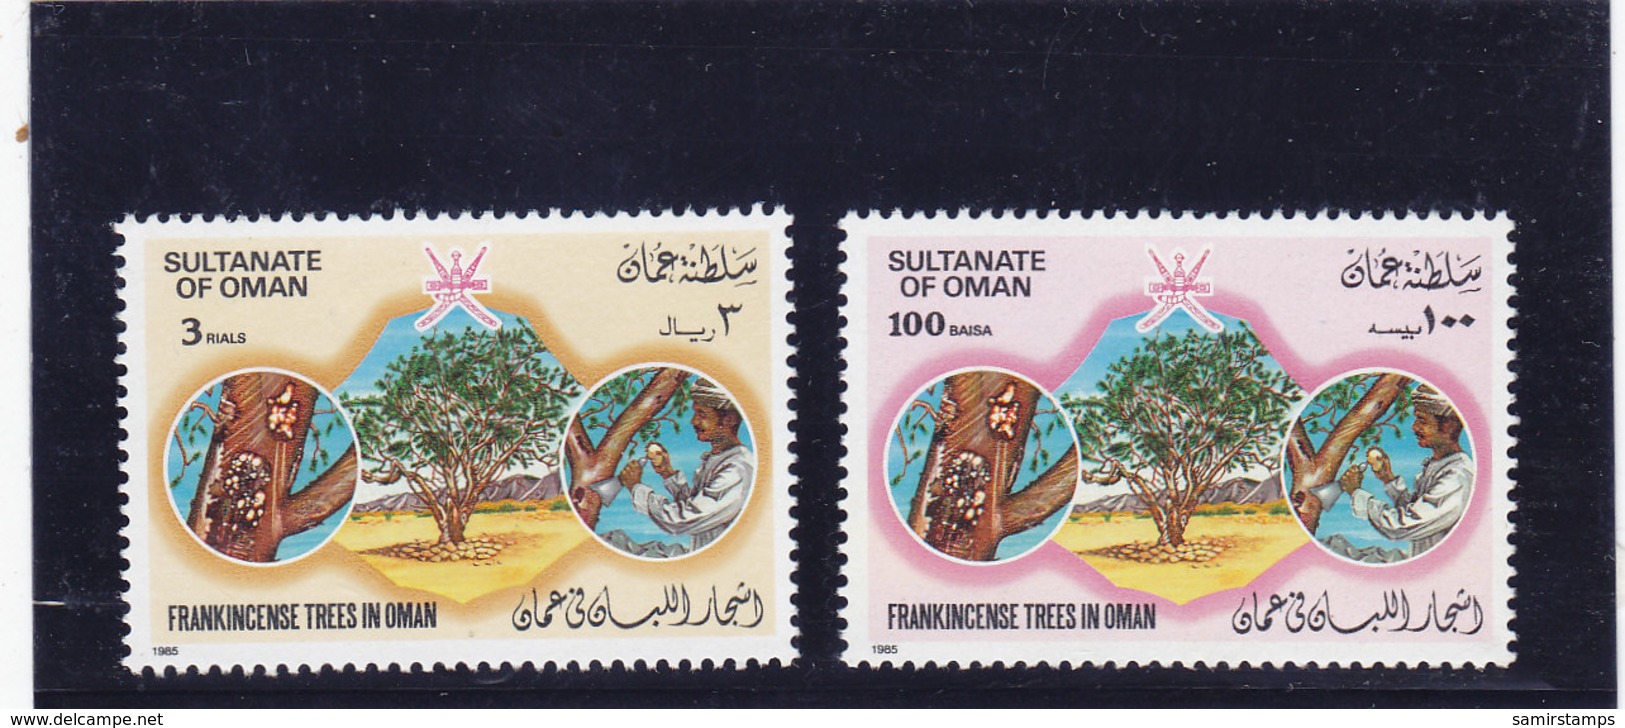 OMAN 1985 Frankincense Trees 2v.complete High Values MNH- Reduced Price- SKRILL PAYMENT ONLY - Oman